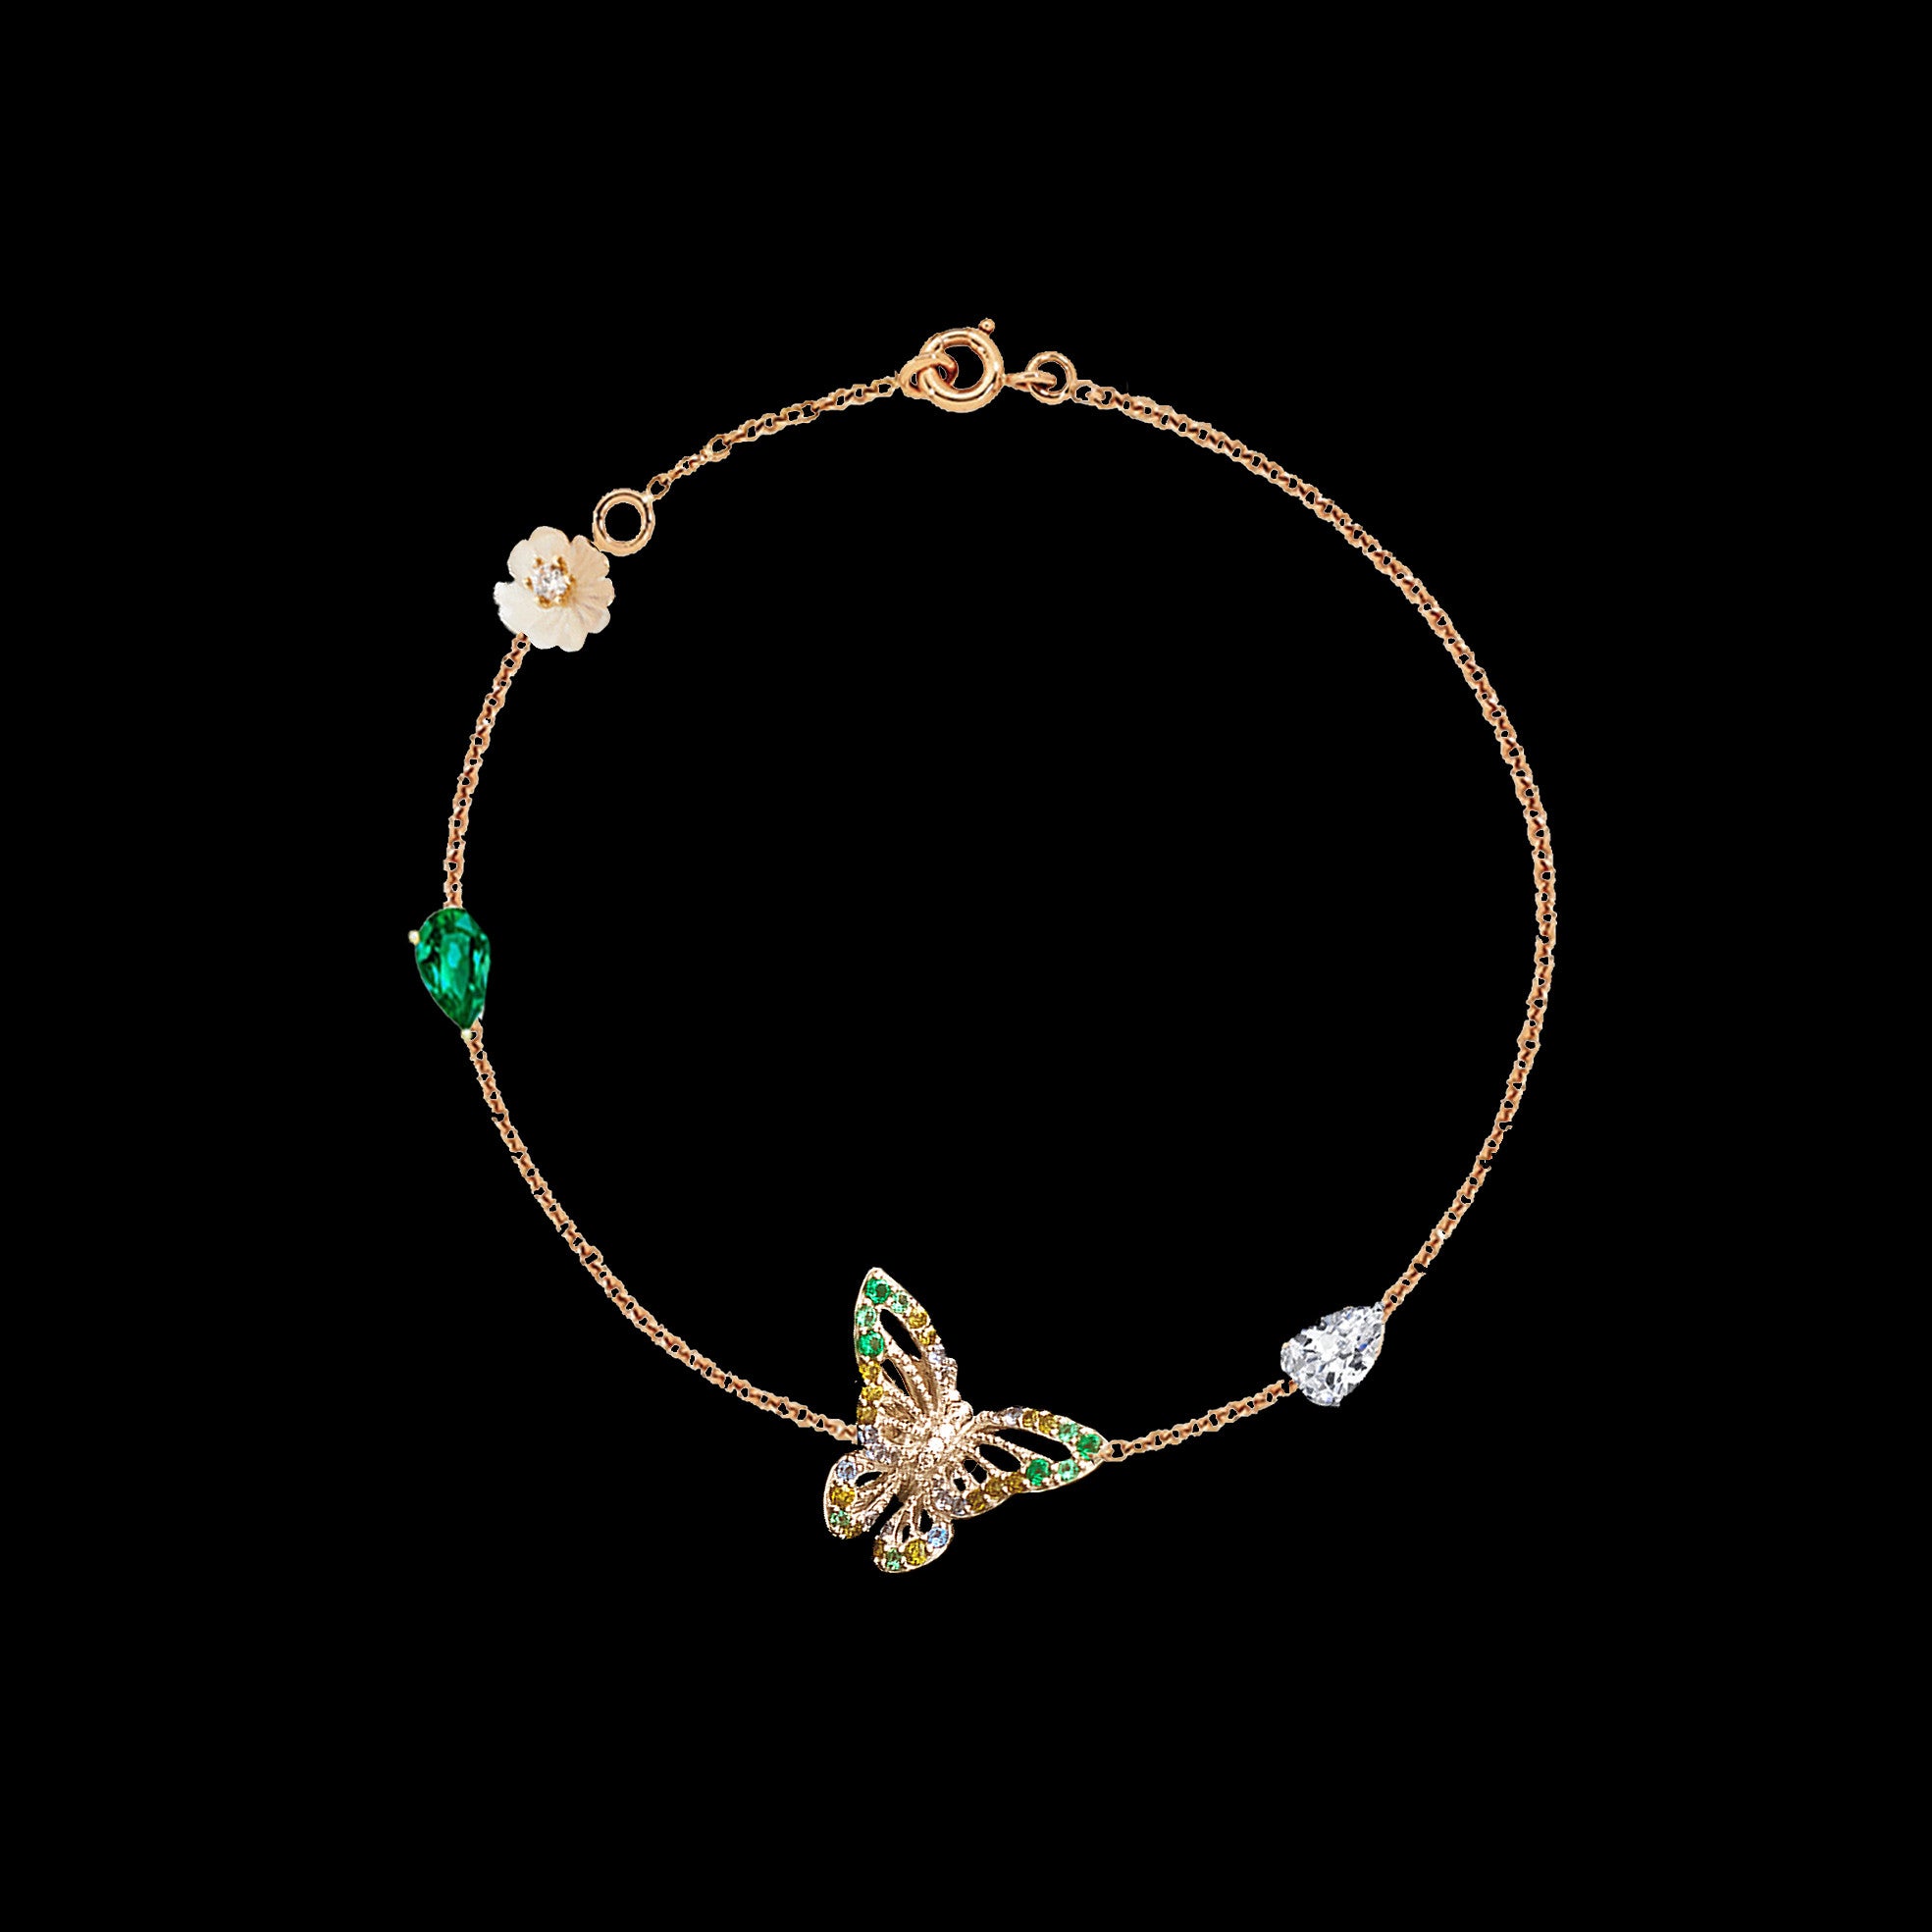 Butterfly Charm Bracelet, Bracelet, Anabela Chan Joaillerie - Fine jewelry with laboratory grown and created gemstones hand-crafted in the United Kingdom. Anabela Chan Joaillerie is the first fine jewellery brand in the world to champion laboratory-grown and created gemstones with high jewellery design, artisanal craftsmanship and a focus on ethical and sustainable innovations.